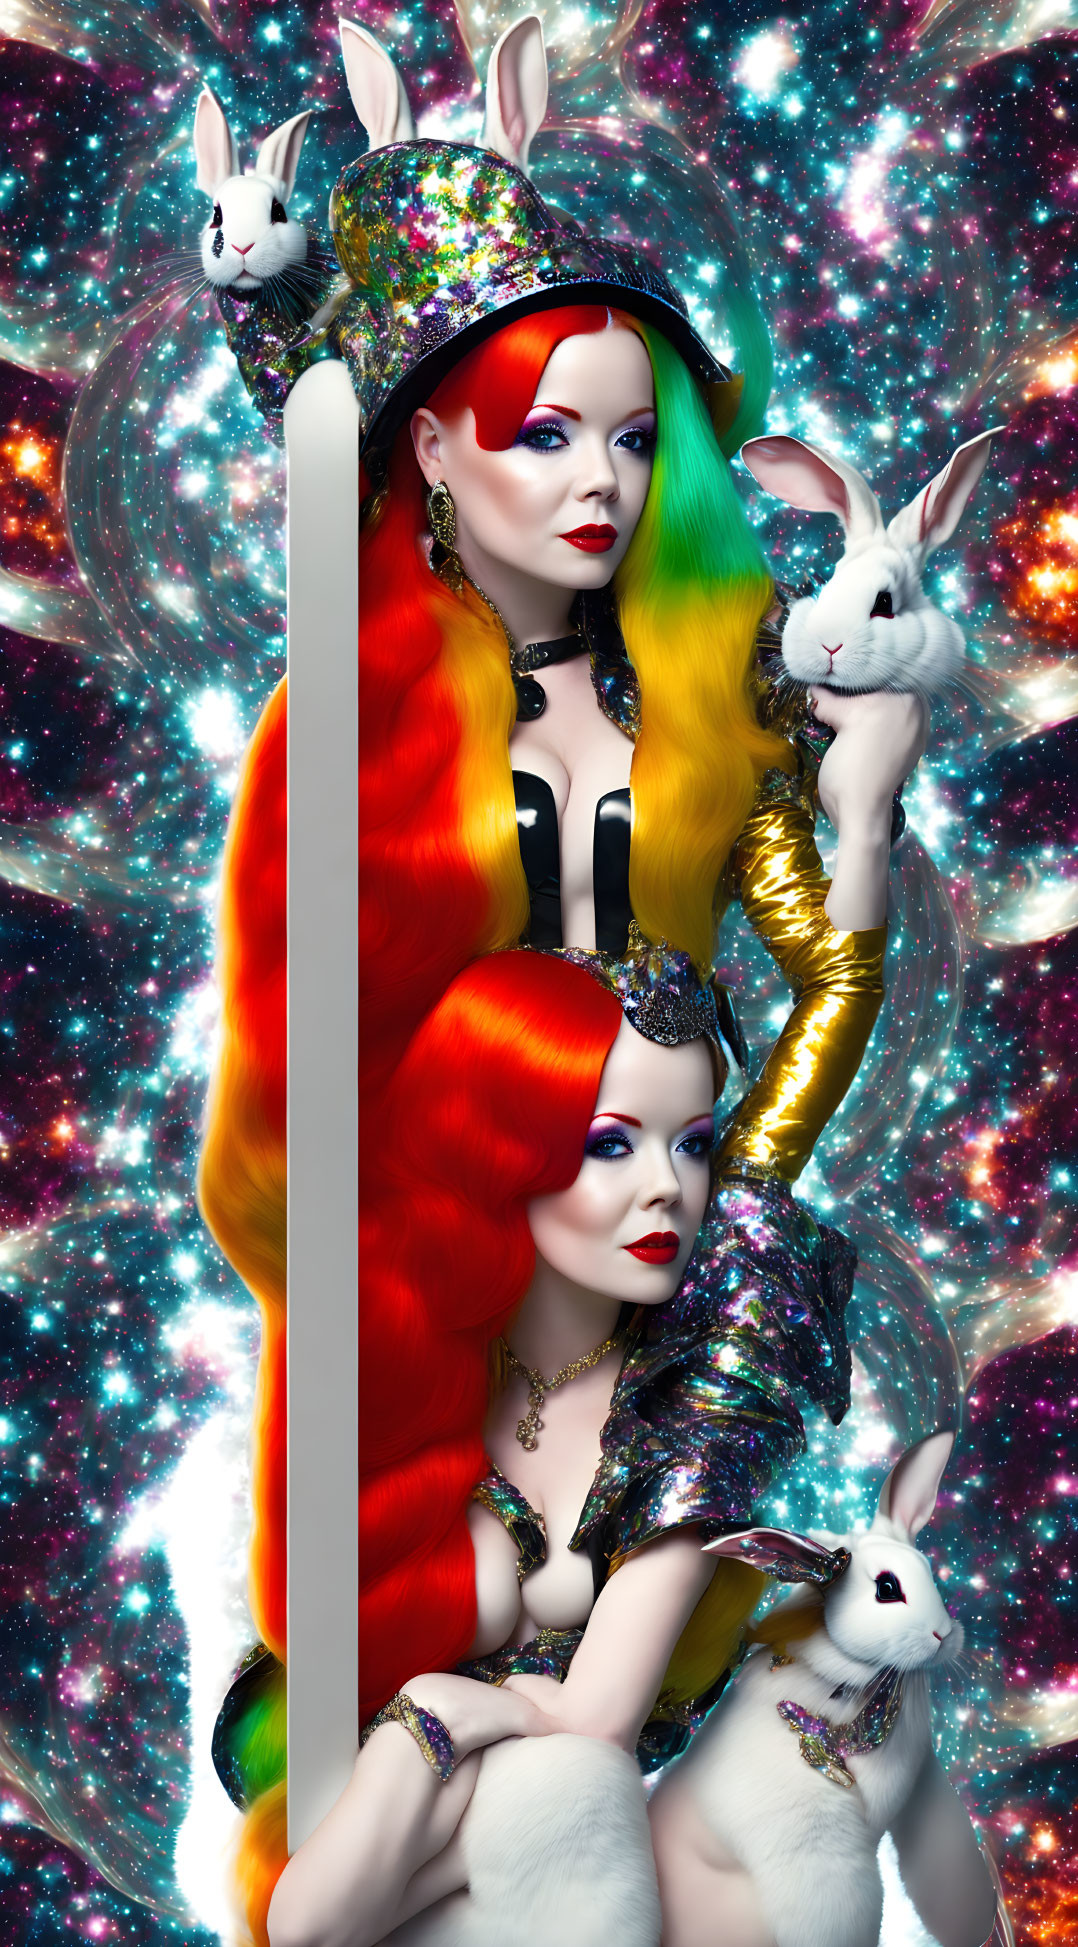 Vibrant portrait of woman with rainbow hair, red eyepatch, holding white rabbits, cosmic